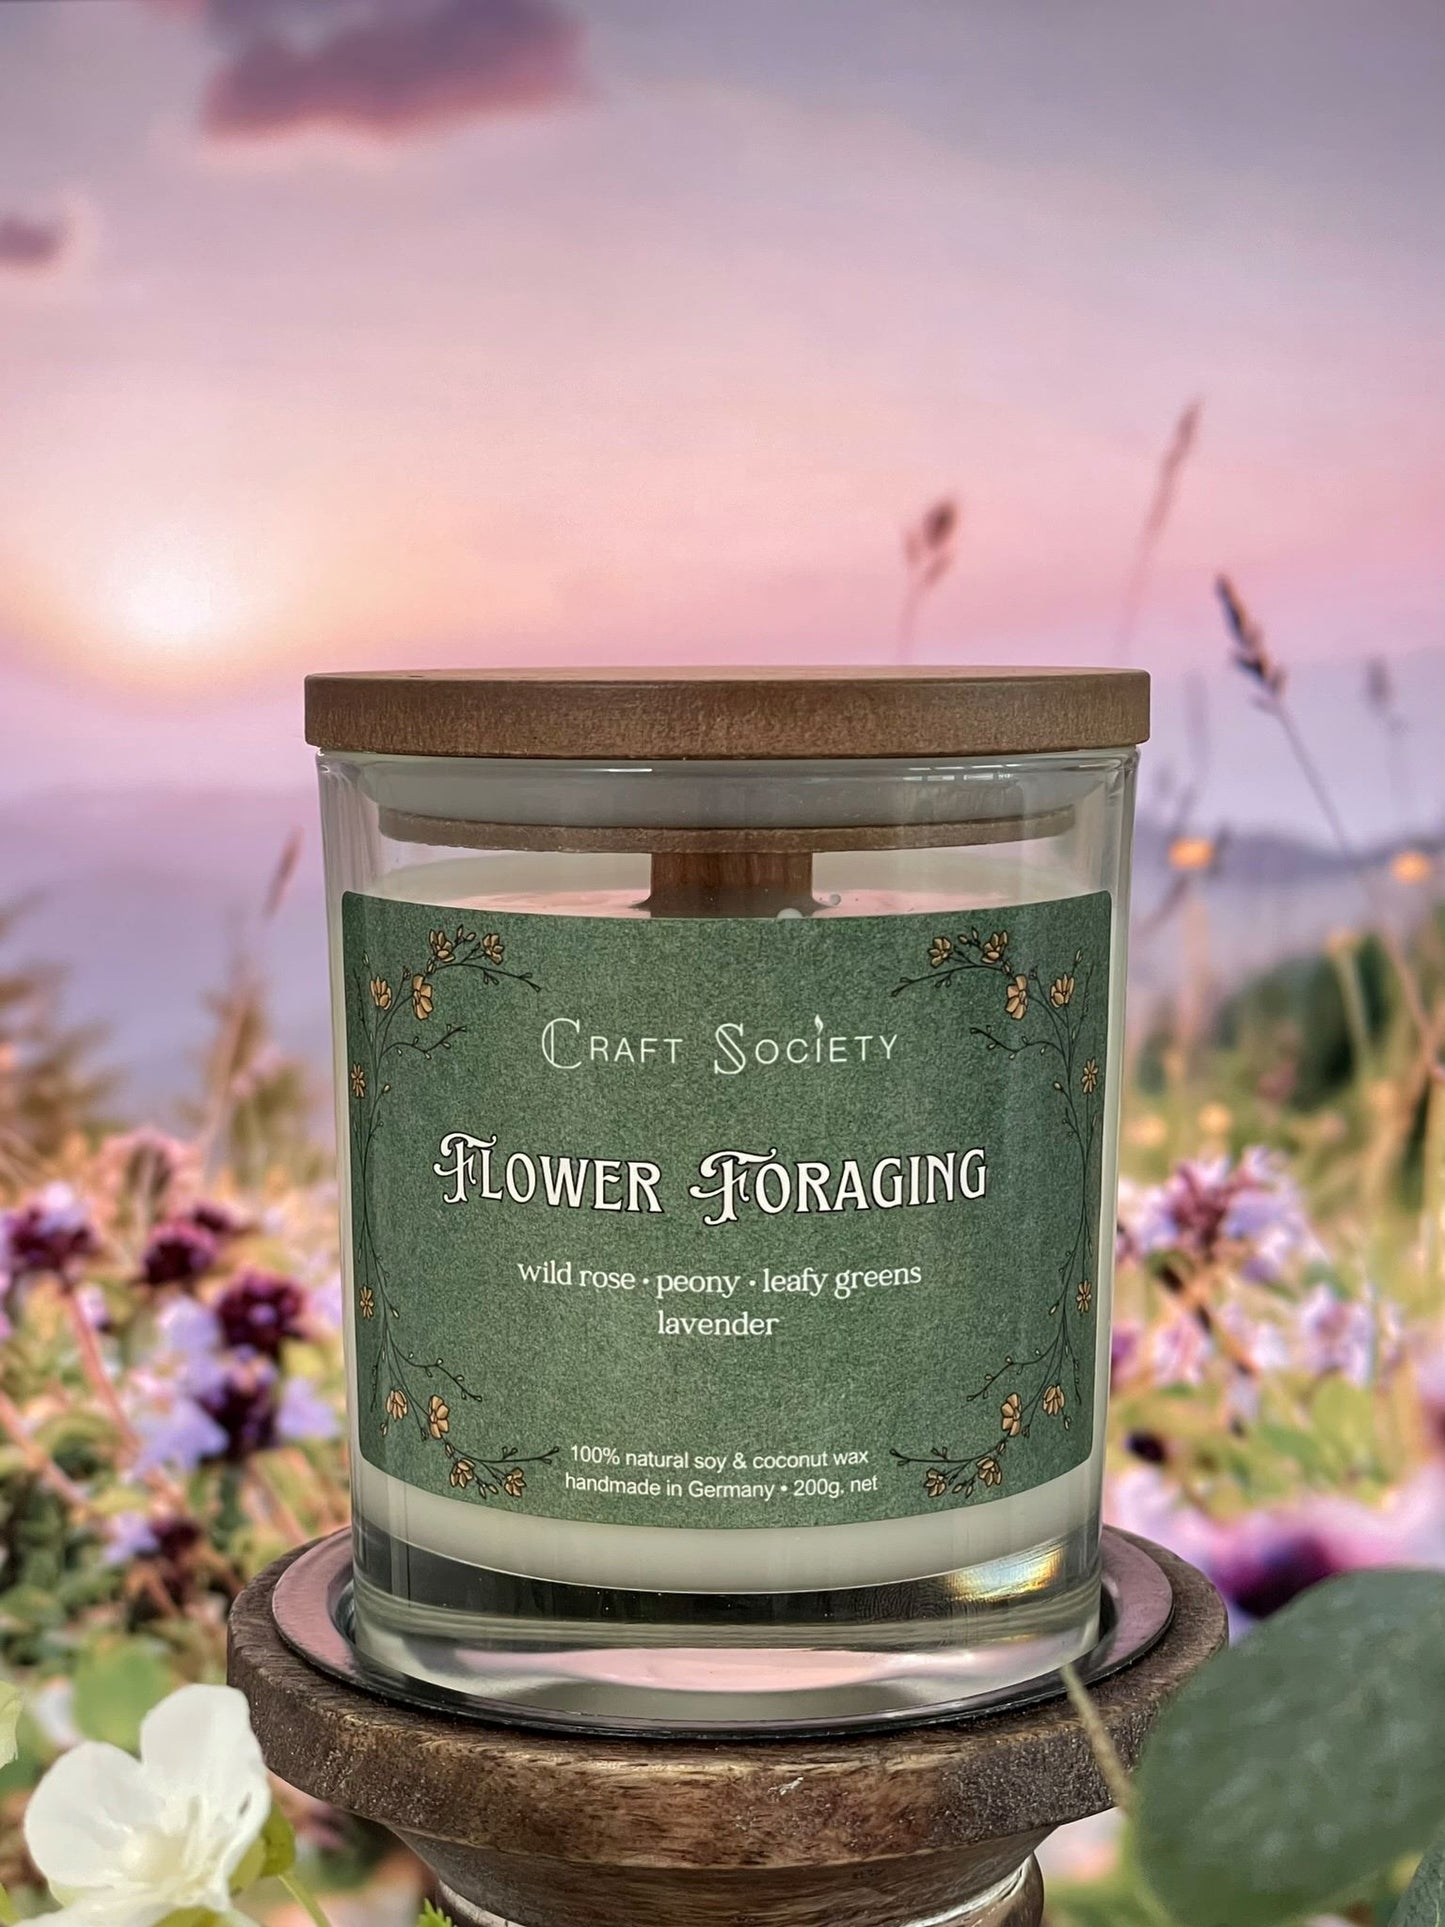 A scented candle called Flower Foraging on a floral and sunrise background, boxed, clear glass jar, deluxe version with wooden wick